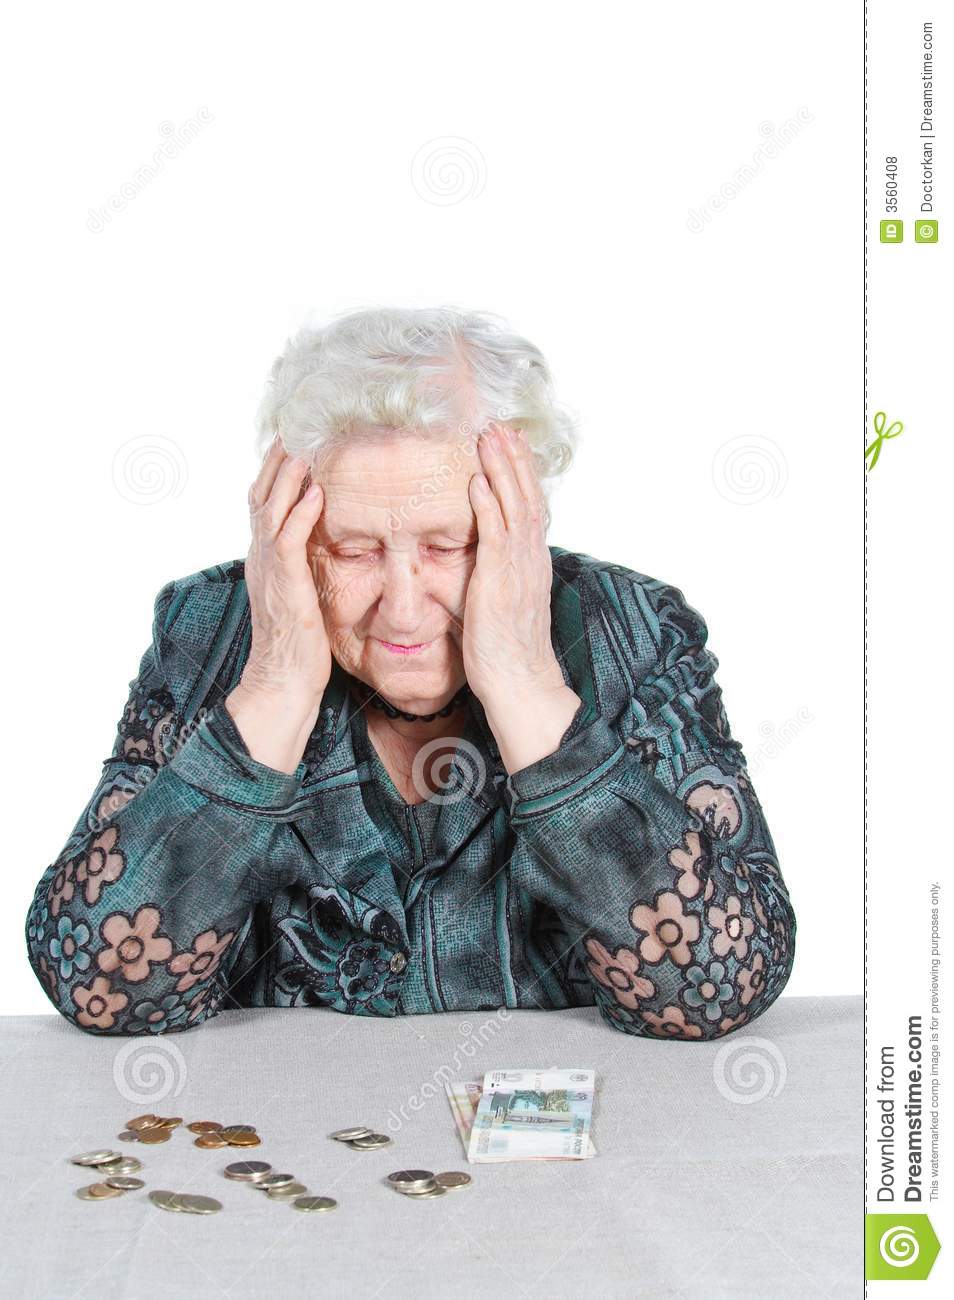 Poor Grandma With Russian Money  Isolated  Senior People Series